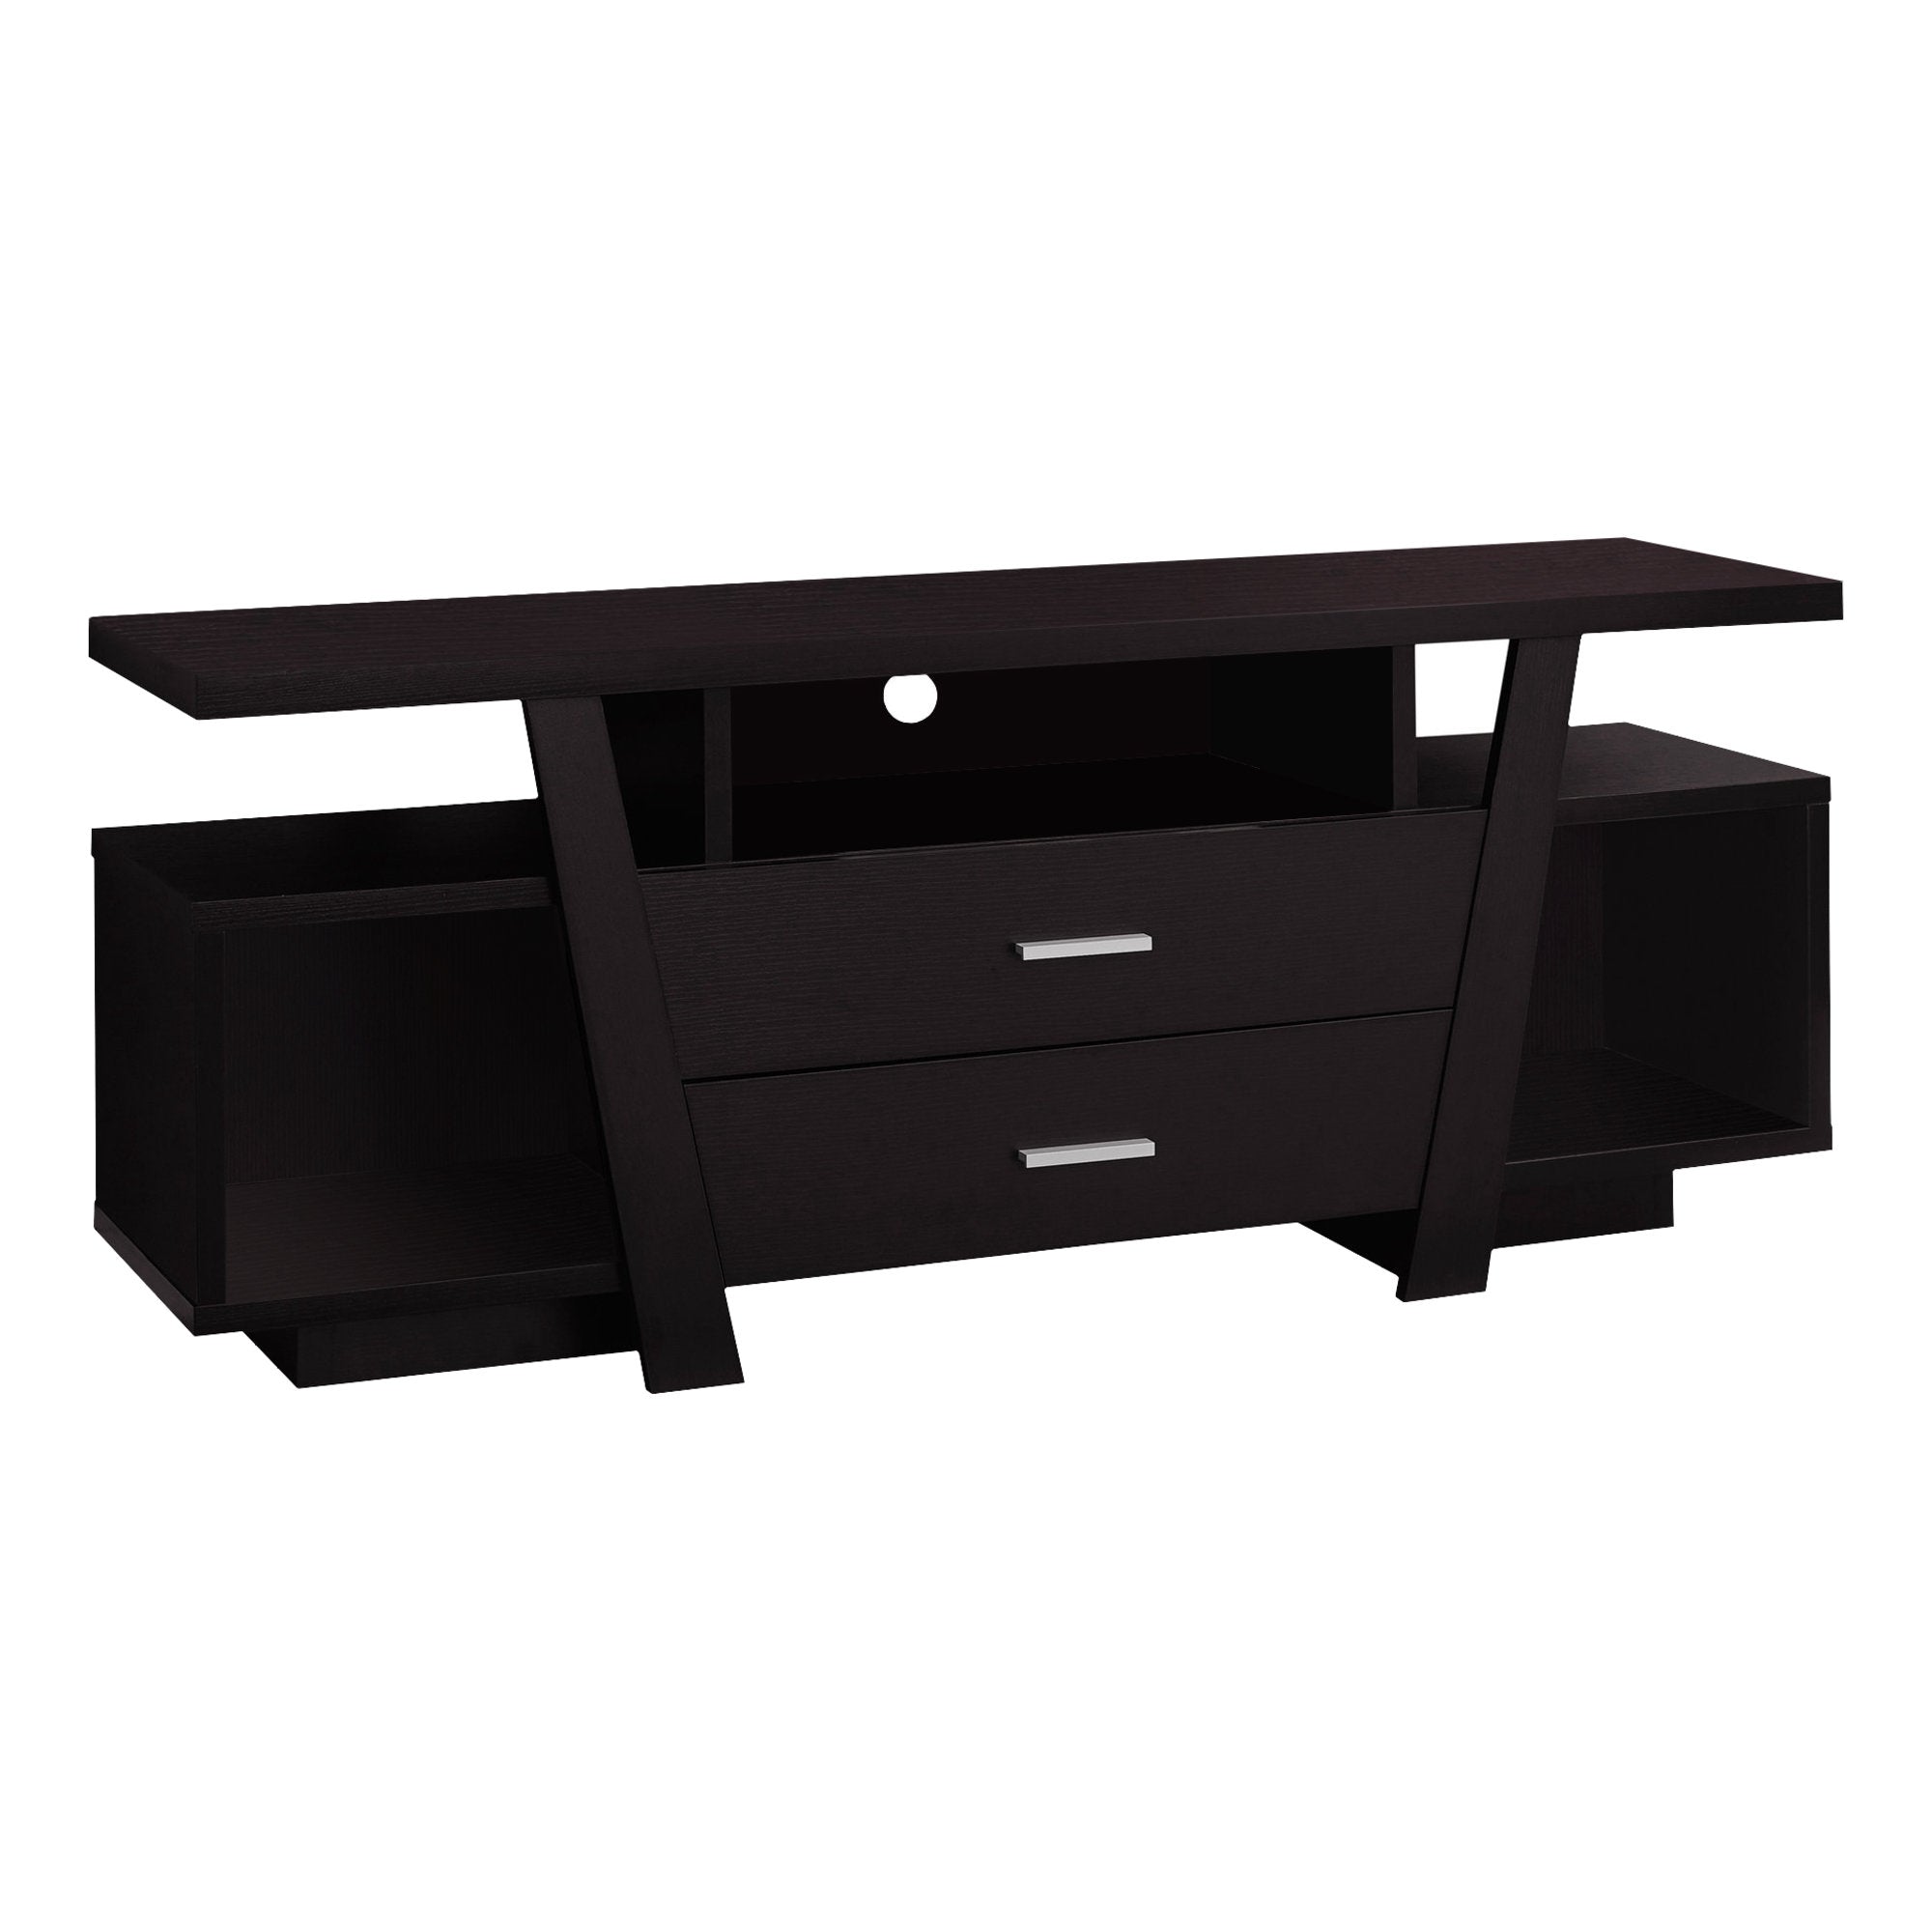 TV STAND - 60"L / DARK TAUPE WITH 2 STORAGE DRAWERS